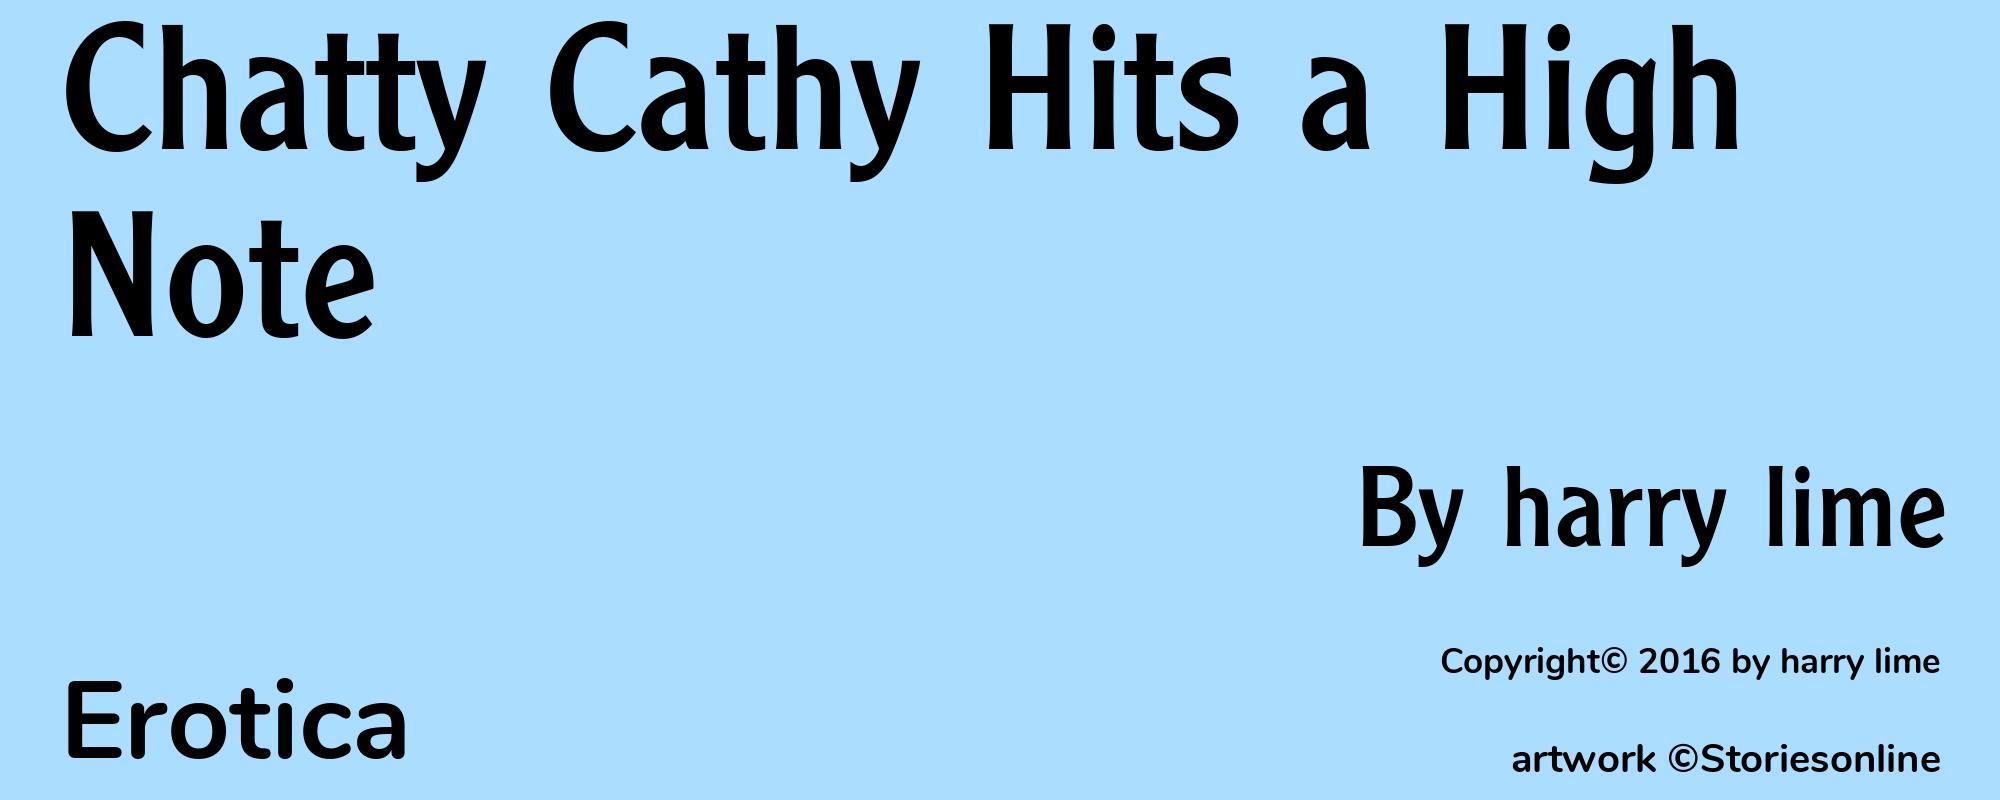 Chatty Cathy Hits a High Note - Cover